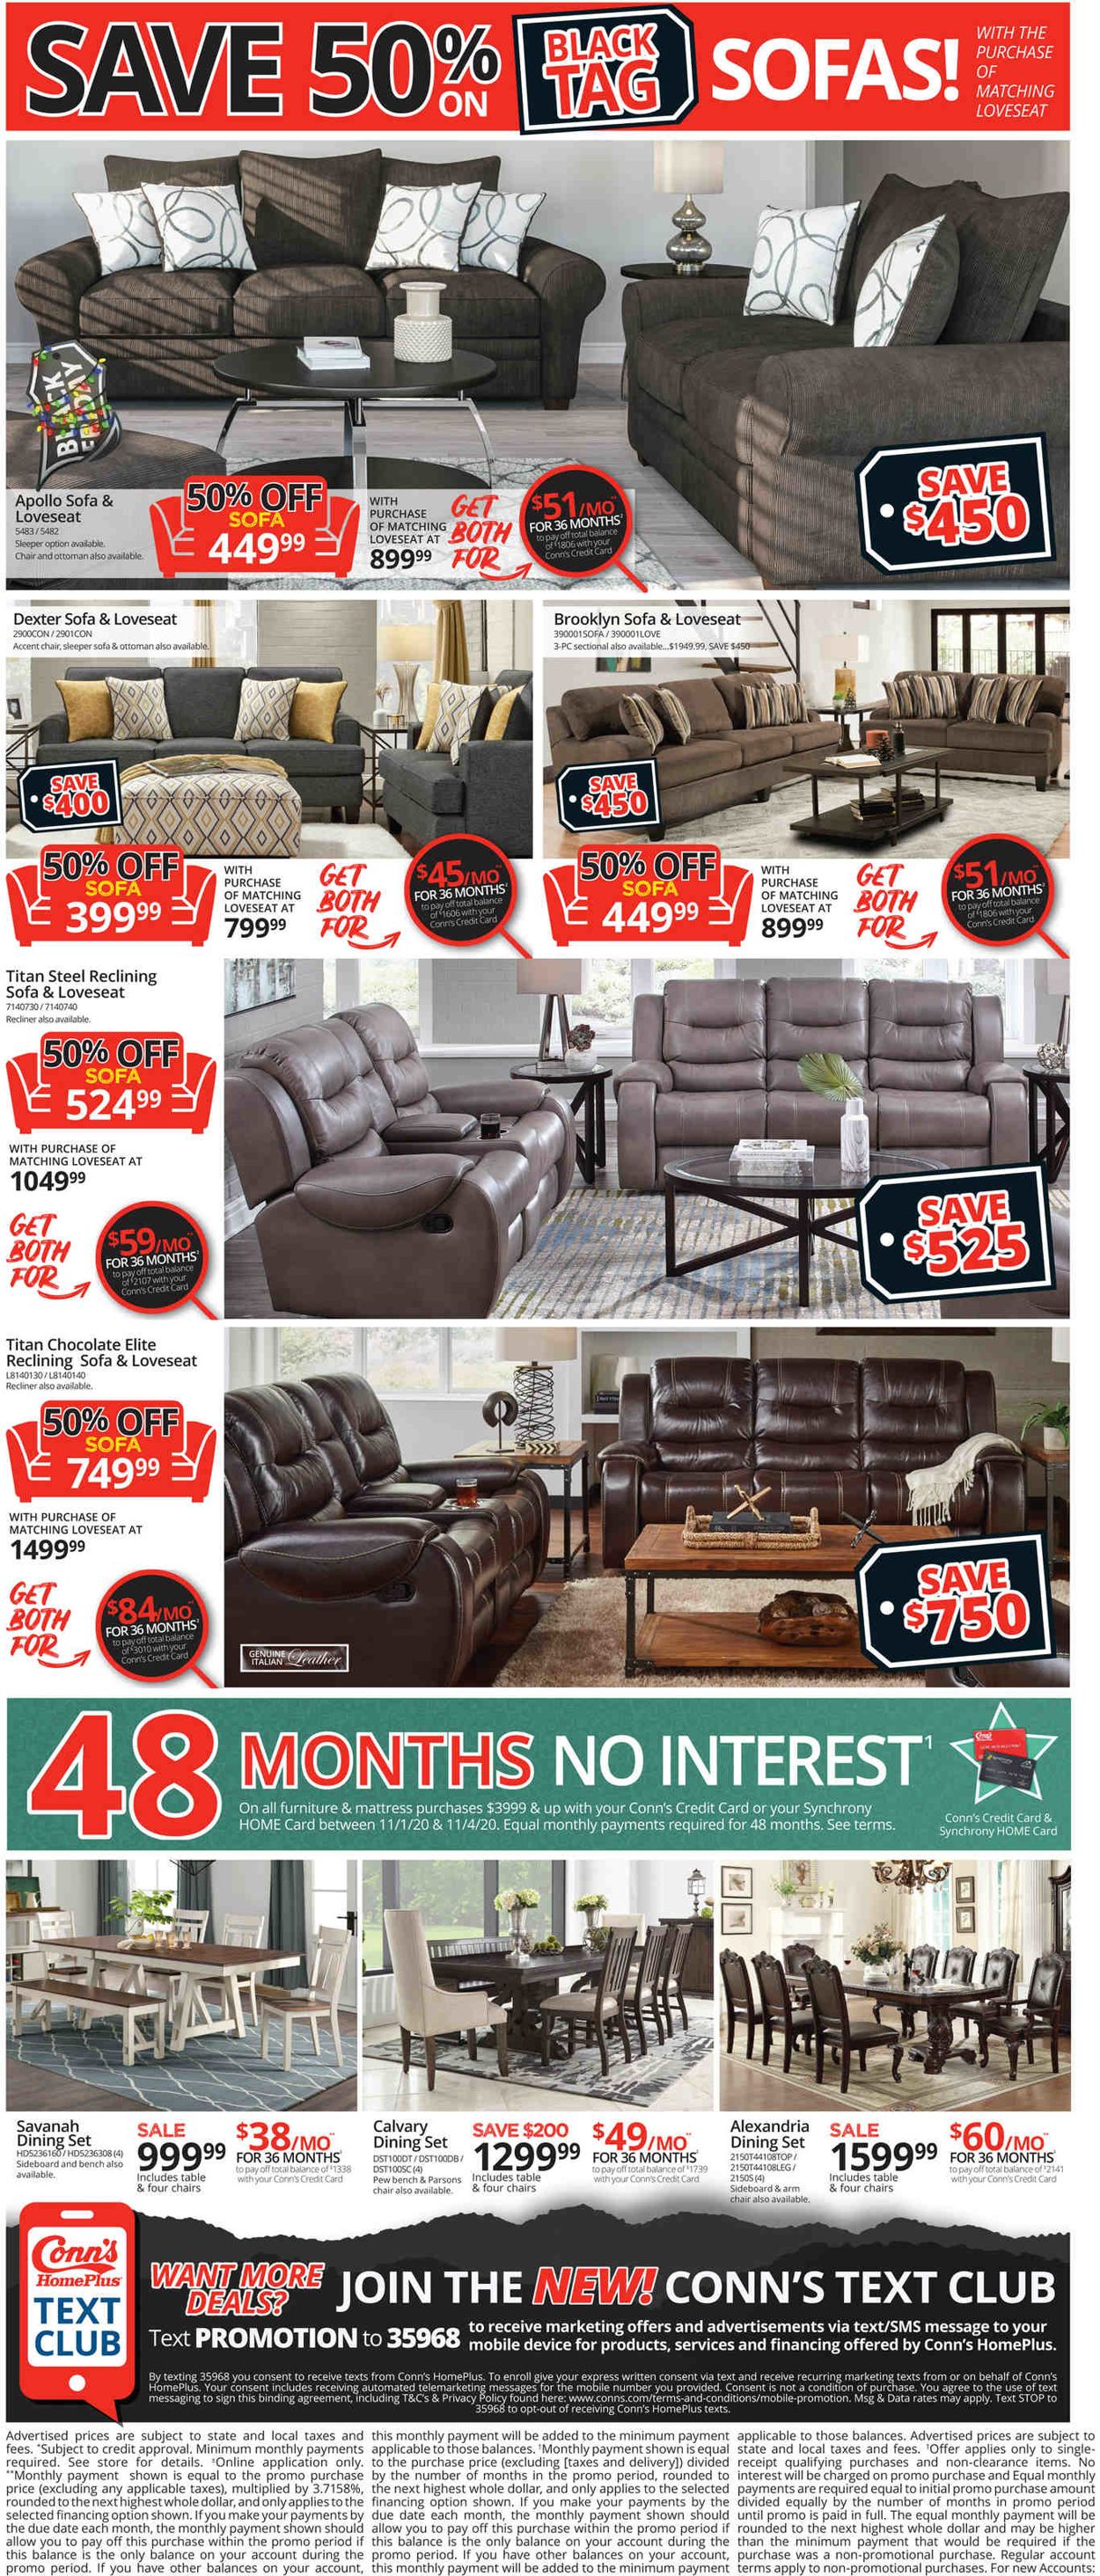 Conn's Home Plus Black Friday 2020 Weekly Ad Circular - valid 11/01-11/04/2020 (Page 2)